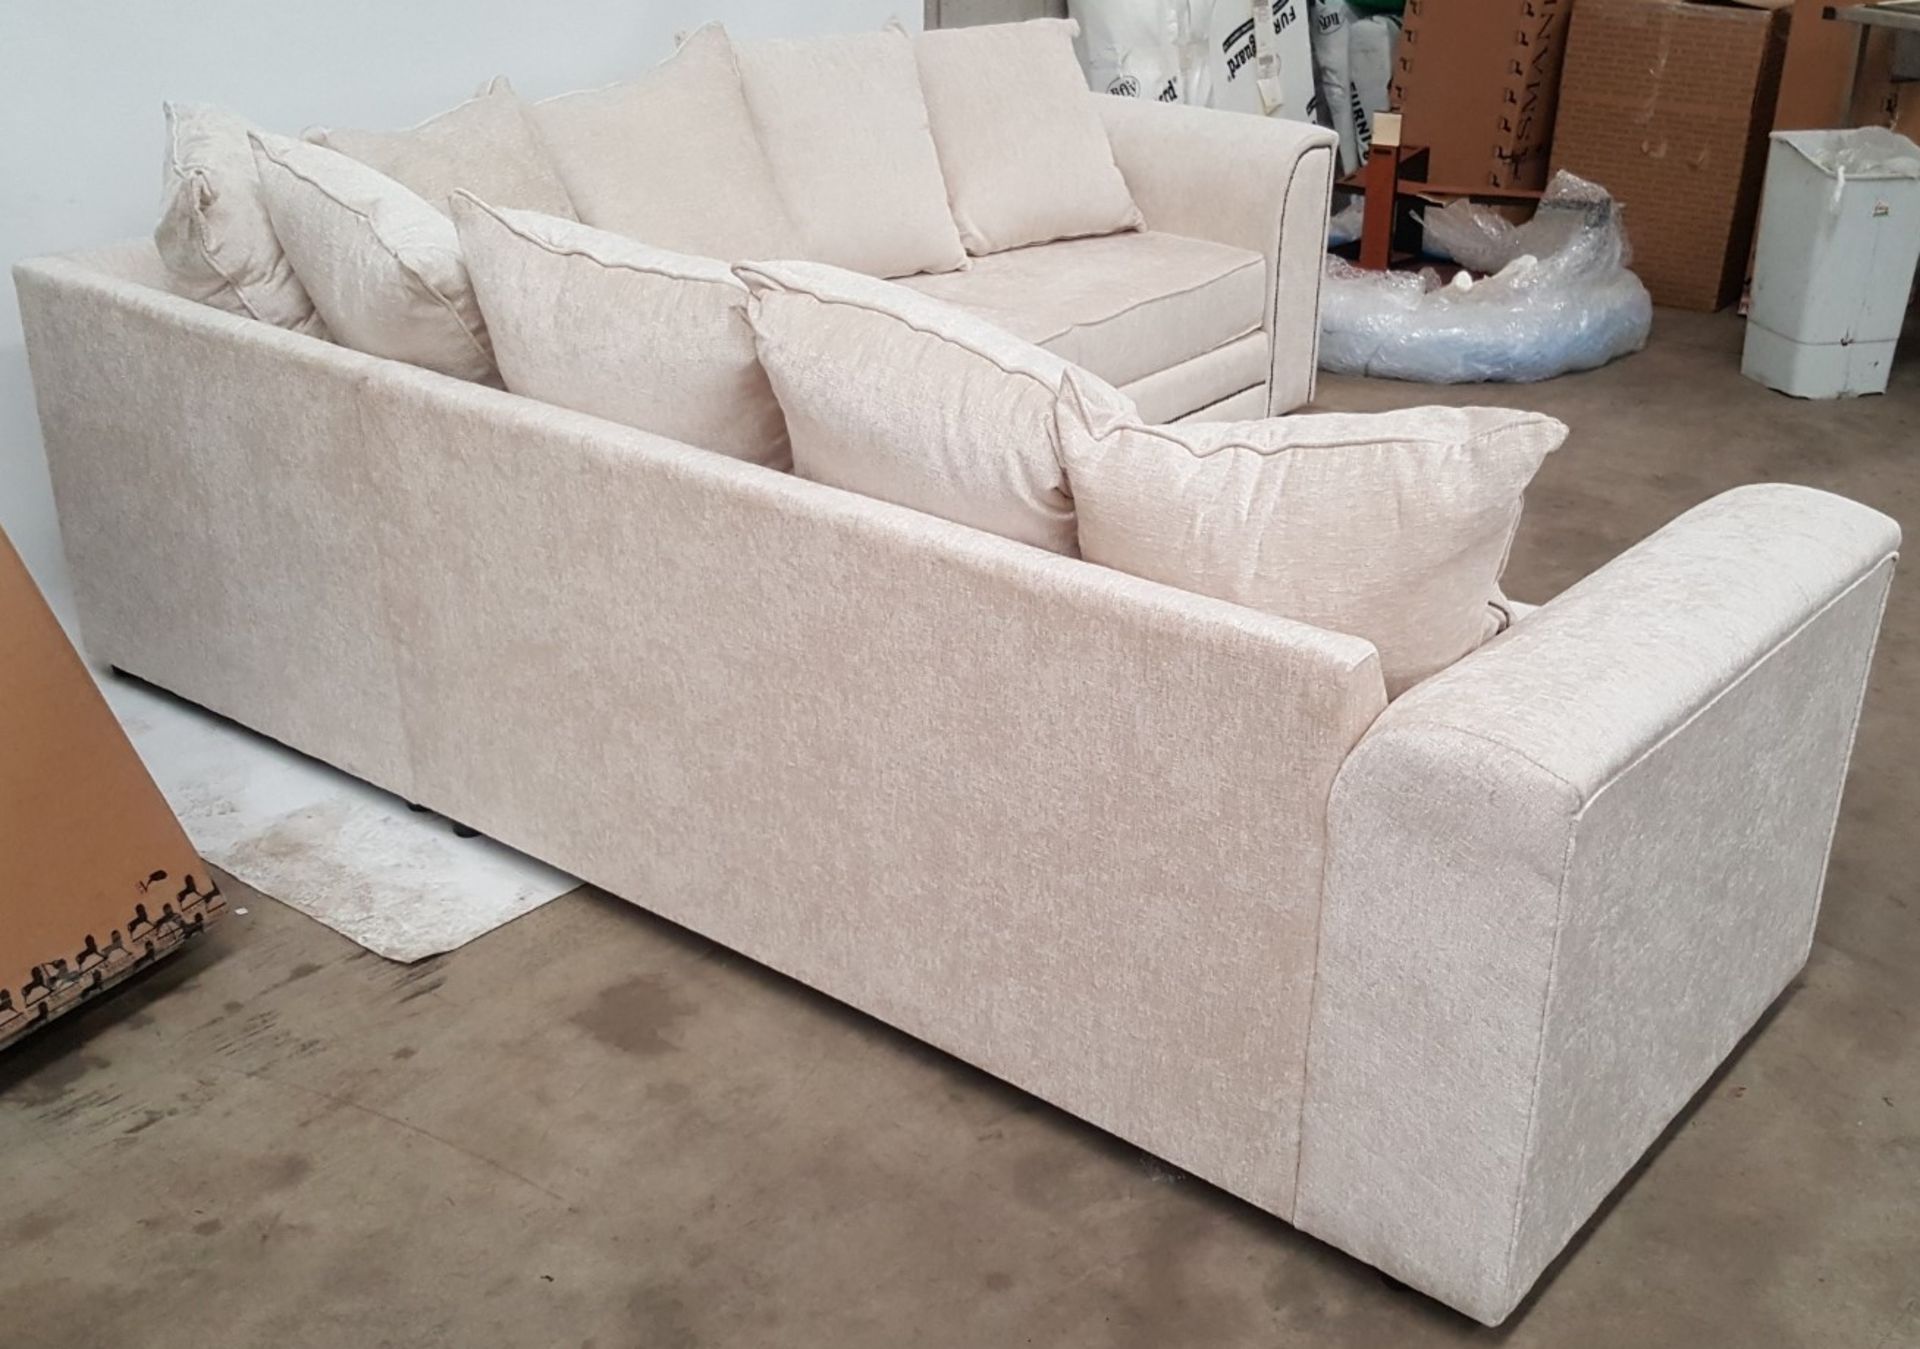 1 x Luxurious Pearl White Fabric L-Shaped Corner Seater Sofa - Ref BY198 - Image 6 of 7